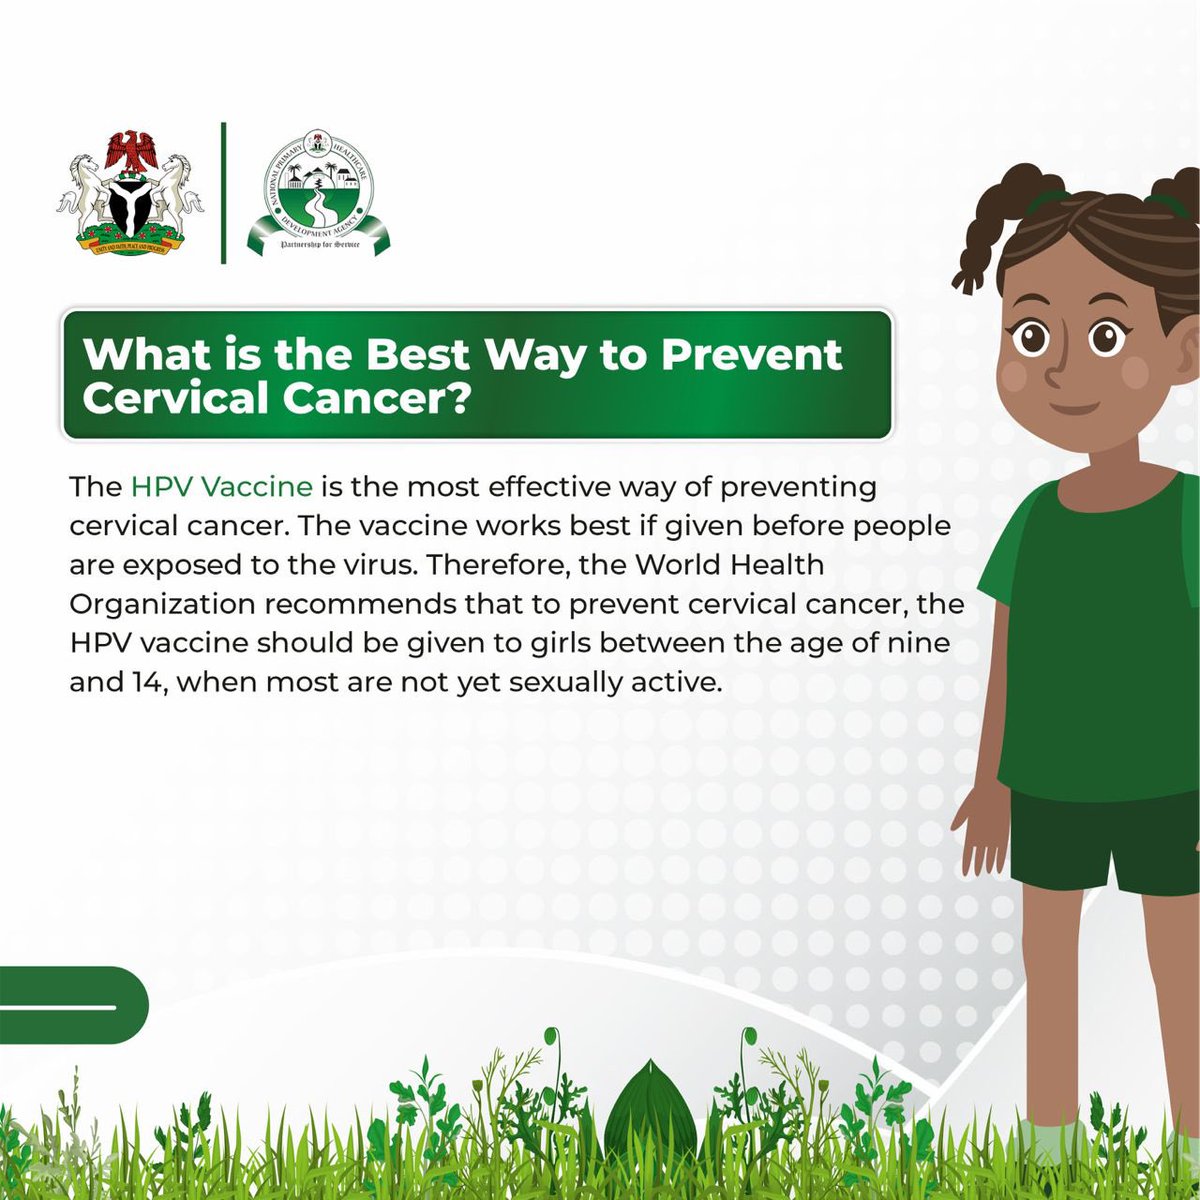 The HPV vaccine is safe and vital in protecting our girls against cervical cancer. Don't let misinformation deter you from getting vaccinated. Visit any Public Health Center NOW!!! #HPVvaccineNG
#SupportImmunization